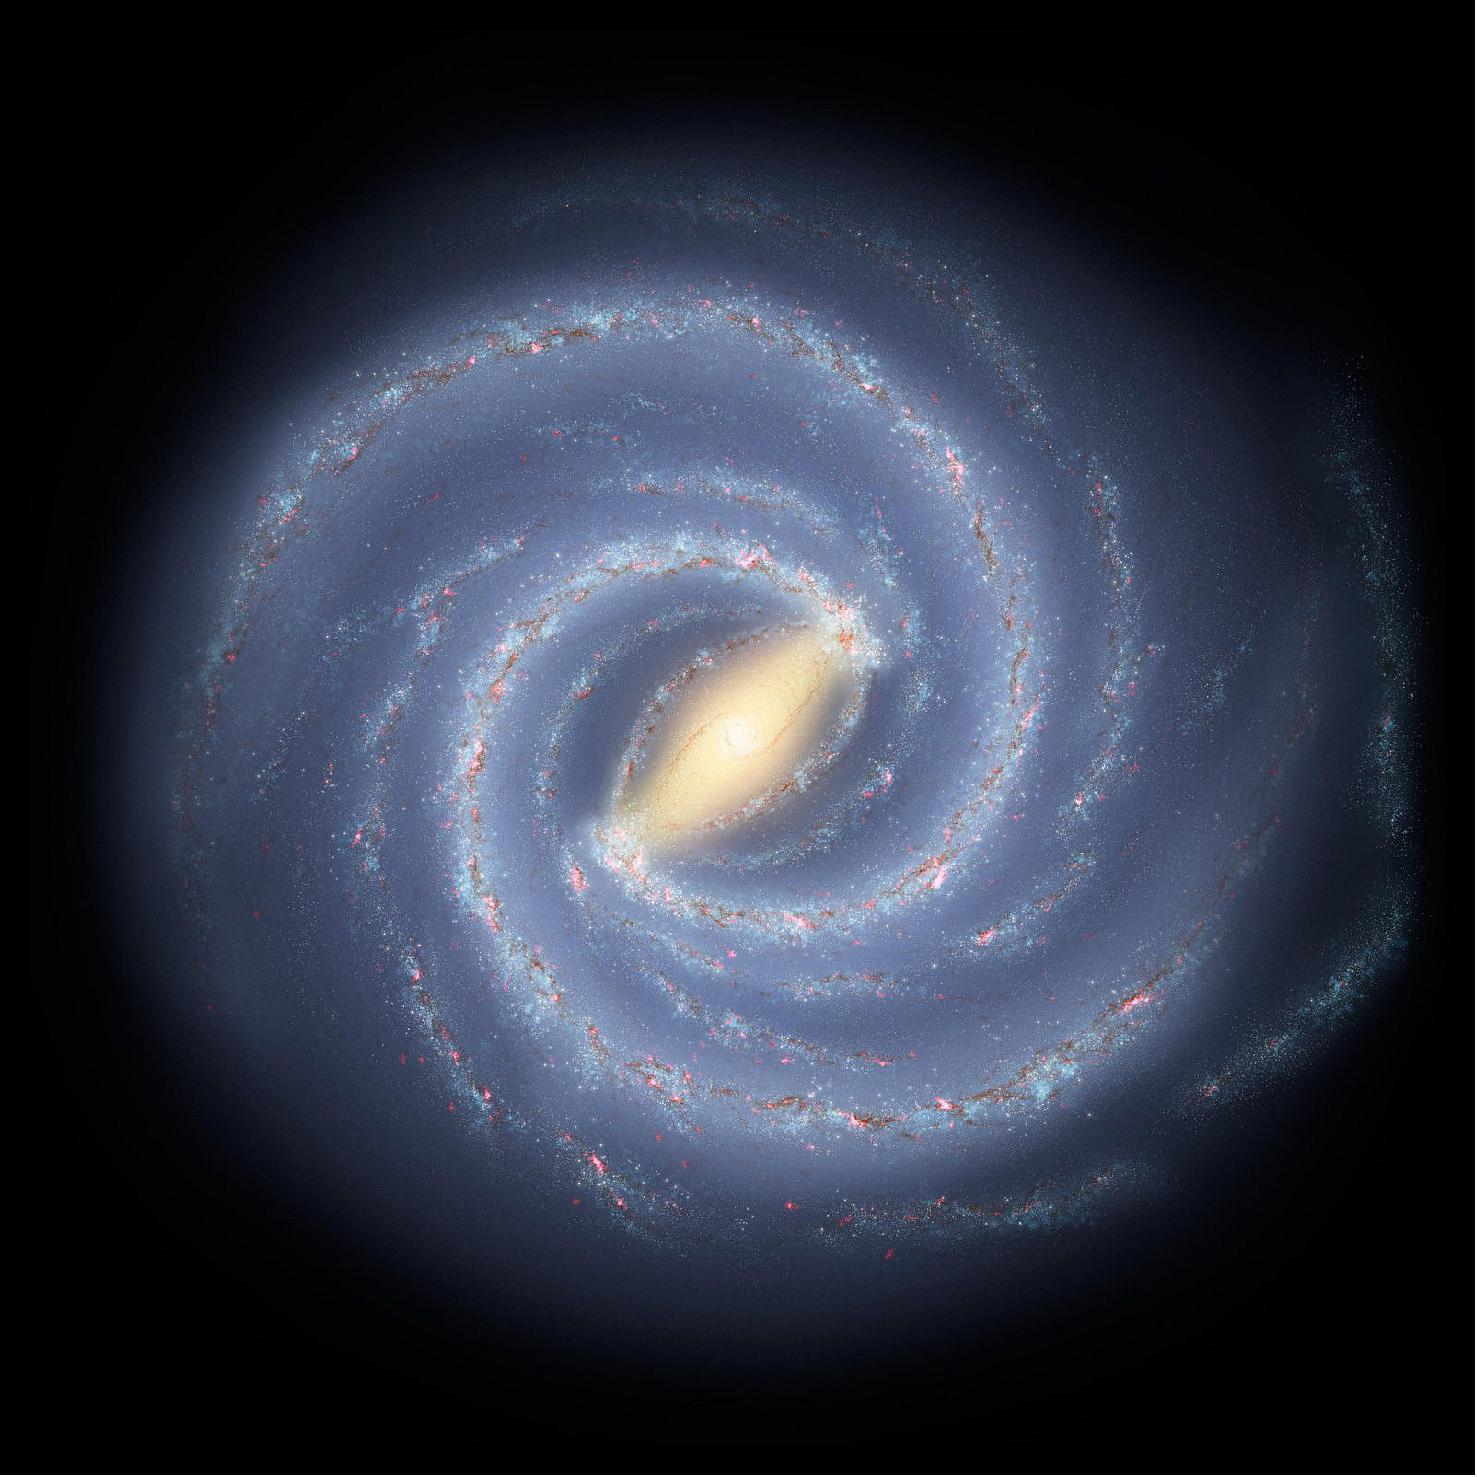 Figure 10: This illustration shows astronomers’ current understanding of the large-scale structure of the Milky Way. Astronomers have a rough idea of the size and shape of the Milky Way’s arms, but much remains unknown: They can’t see the full structure of our home galaxy because Earth is inside it. It’s akin to standing in the middle of Times Square and Like early explorers mapping the continents of our globe, astronomers are busy charting the spiral structure of our galaxy, the Milky Way. Using infrared images from NASA's Spitzer Space Telescope, scientists have discovered that the Milky Way's elegant spiral structure is dominated by just two arms wrapping off the ends of a central bar of stars. Previously, our galaxy was thought to possess four major arms. - This artist's concept illustrates the new view of the Milky Way, along with other findings presented at the 212th American Astronomical Society meeting in St. Louis, Mo. The galaxy's two major arms (Scutum-Centaurus and Perseus) can be seen attached to the ends of a thick central bar, while the two now-demoted minor arms (Norma and Sagittarius) are less distinct and located between the major arms. The major arms consist of the highest densities of both young and old stars; the minor arms are primarily filled with gas and pockets of star-forming activity. - The artist's concept also includes a new spiral arm, called the "Far-3 kiloparsec arm," discovered via a radio-telescope survey of gas in the Milky Way. This arm is shorter than the two major arms and lies along the bar of the galaxy. - Our sun lies near a small, partial arm called the Orion Arm, or Orion Spur, located between the Sagittarius and Perseus arms (image credit: NASA/JPL-Caltech)